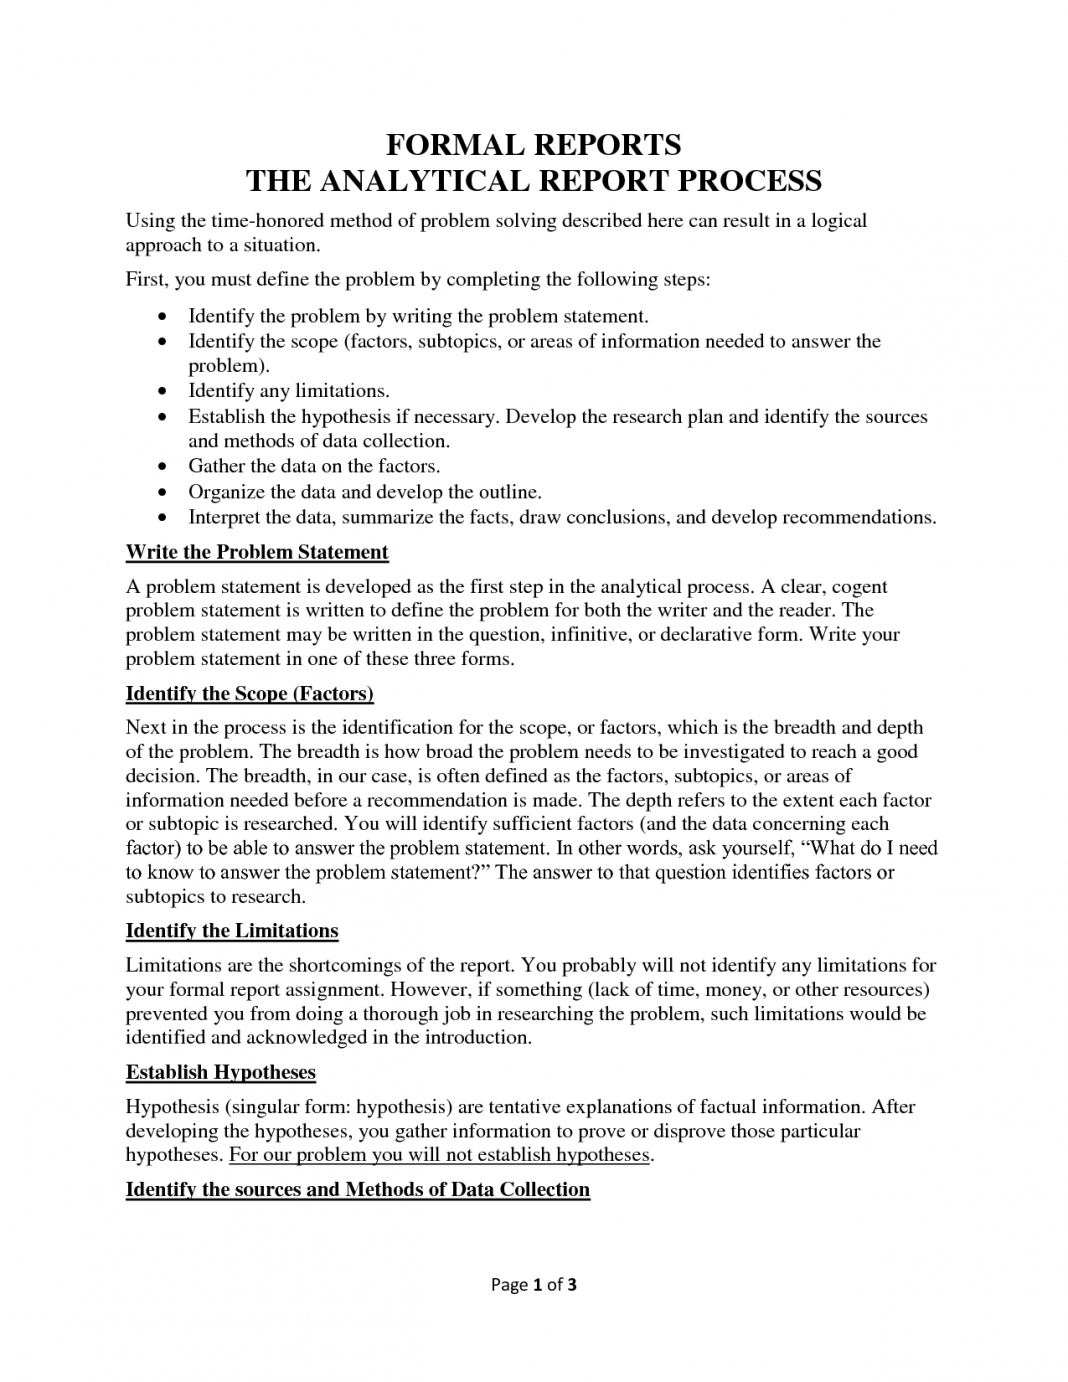 Examples Of Professional Business Reports West Roanoke Regarding Analytical Report Template